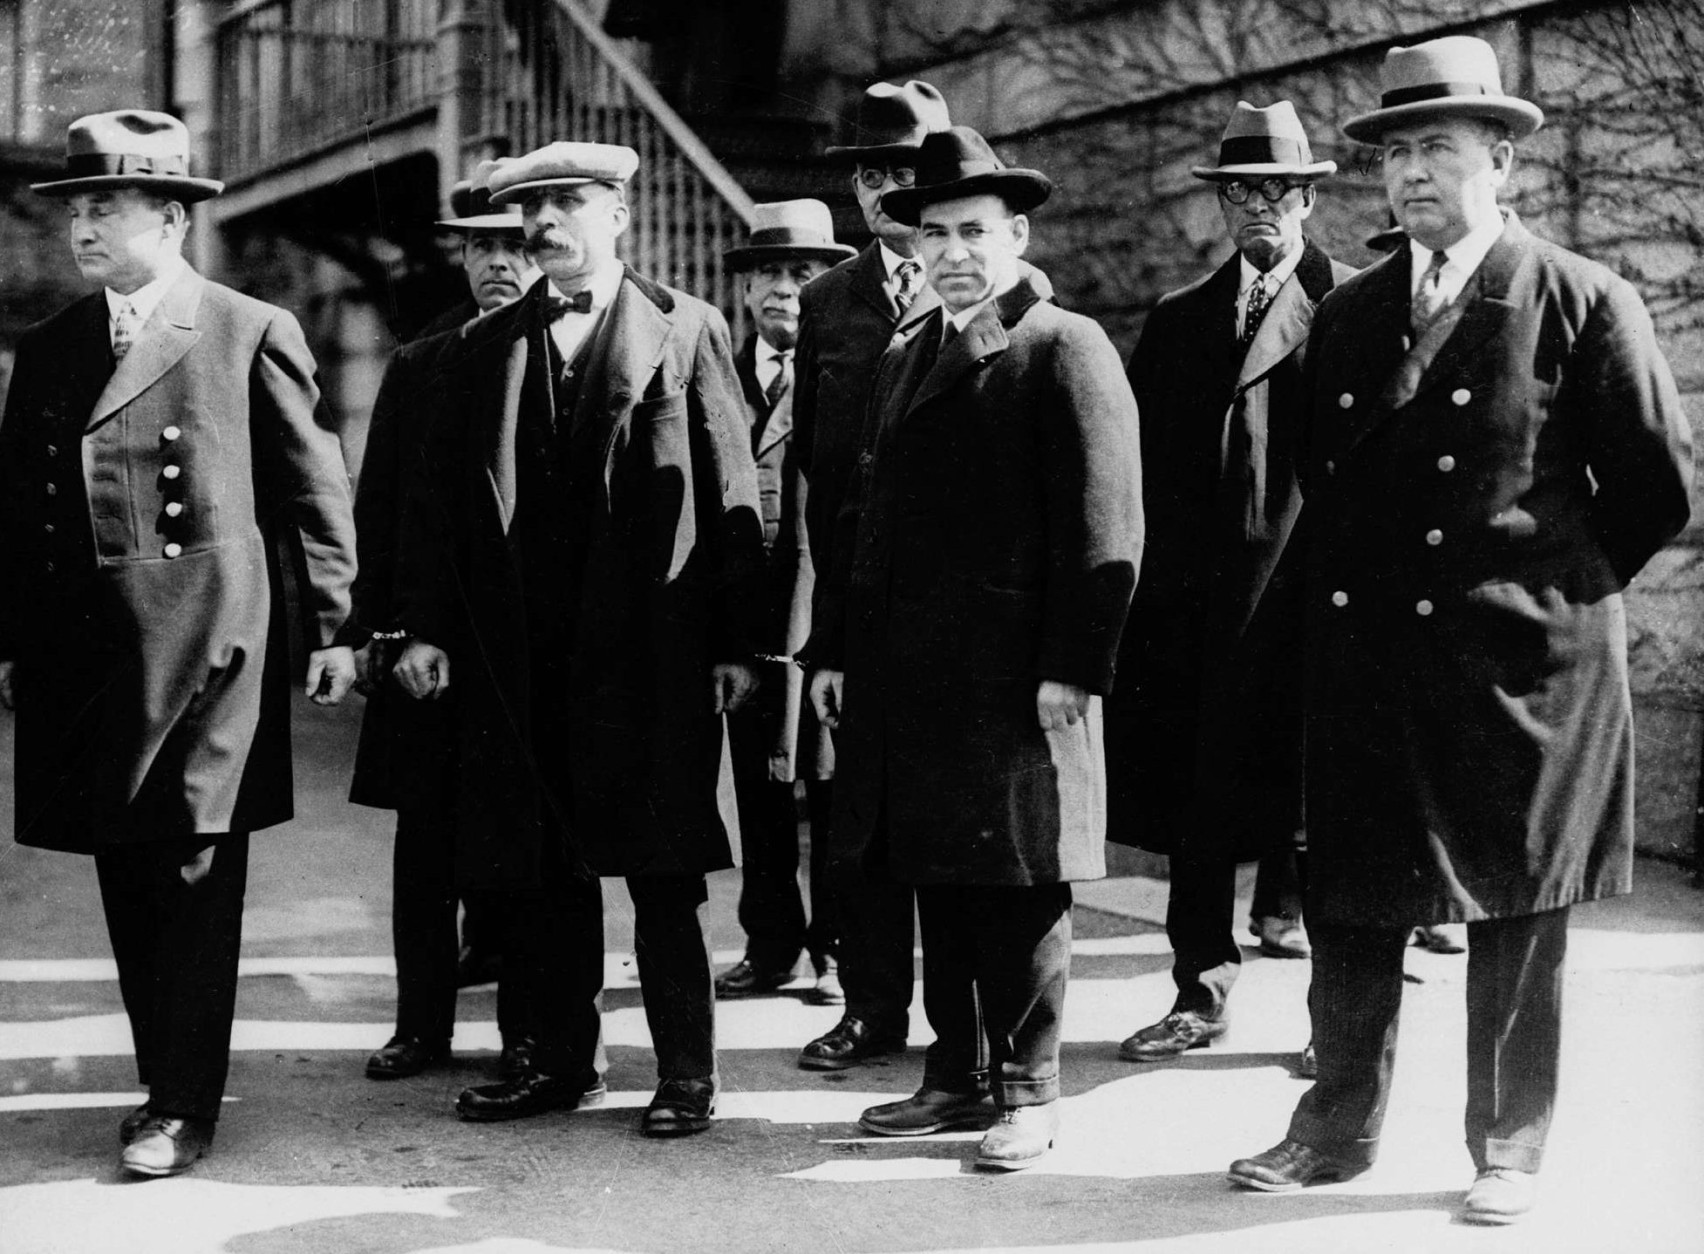 FILE-- Italian immigrants Nicola Sacco, second from right foreground, and Bartolomeo Vanzetti, second from left foreground, stand in handcuffs with unidentified escorts in Massachusetts around 1927. Sacco and Vanzetti, arrested in 1920, were accused of killing a  paymaster and guard in Braintree, and stealing about $16,000.  Many believed they were convicted because of their anarchistic beliefs. Their scheduled execution was protested by ordinary and prominent men and women. The city of Boston will usea bronze sculpture of Sacco and Vanzetti to say the two men, executed 70 years ago, did not get a fair trial, said Mayor Thomas M. Menino, Tuesday, Aug. 19, 1997. On the anniversary of the executions, Saturday, Aug. 23, 1997, Menino will commission the sculpture which is to be in place by the year 2000, but it has not been  decided where. (AP Photo/File)